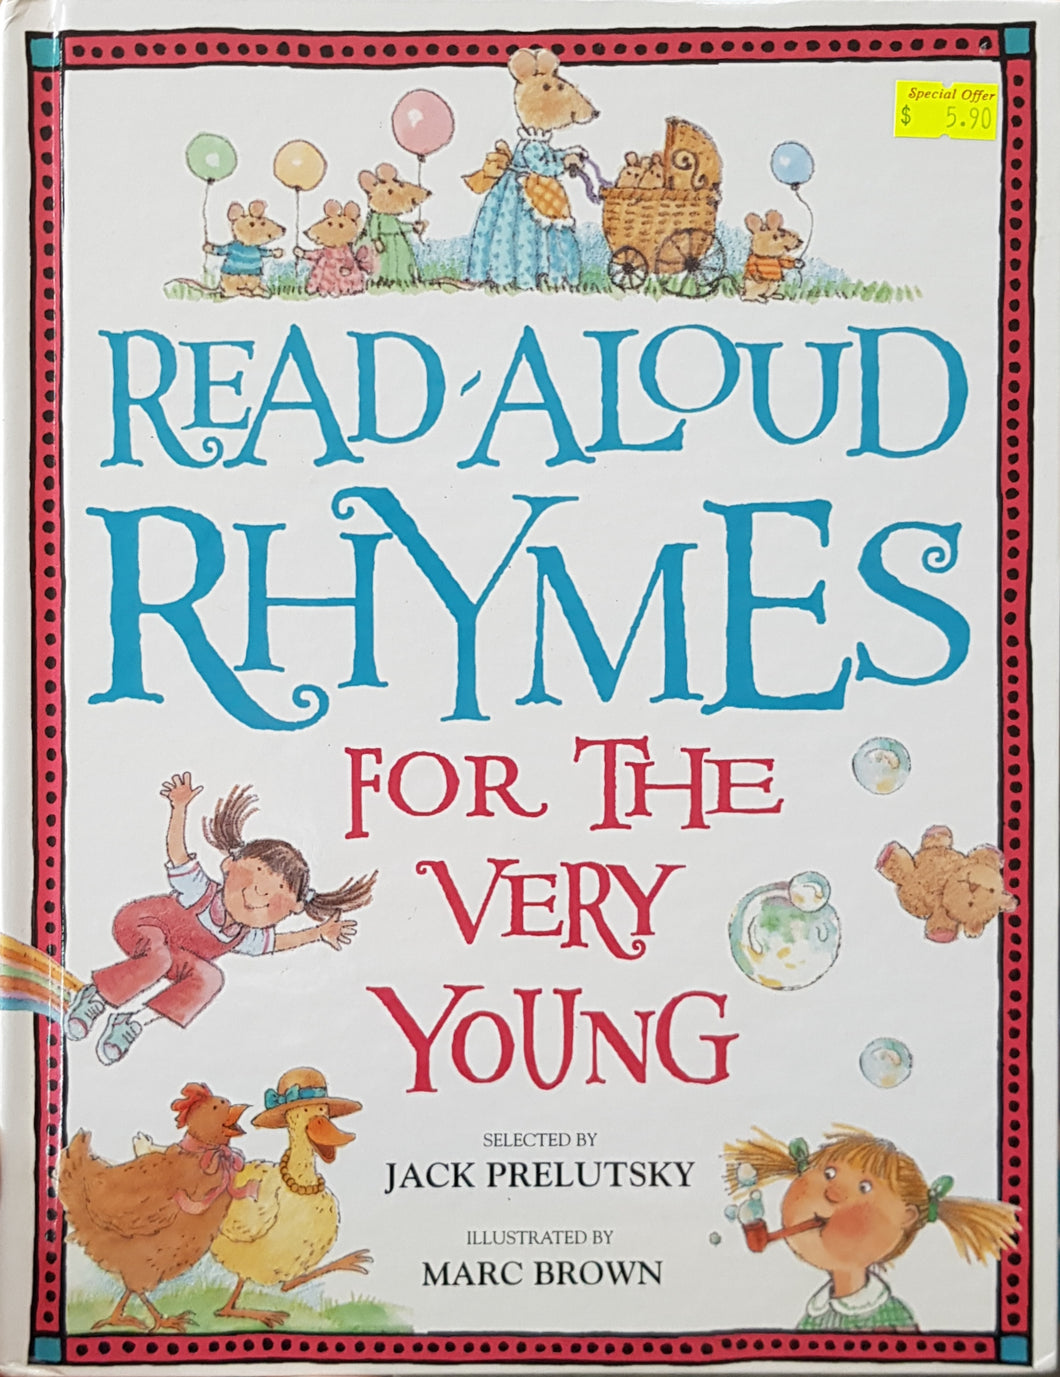 Read-Aloud Rhymes for the Very Young - Jack Prelutsky & Marc Brown